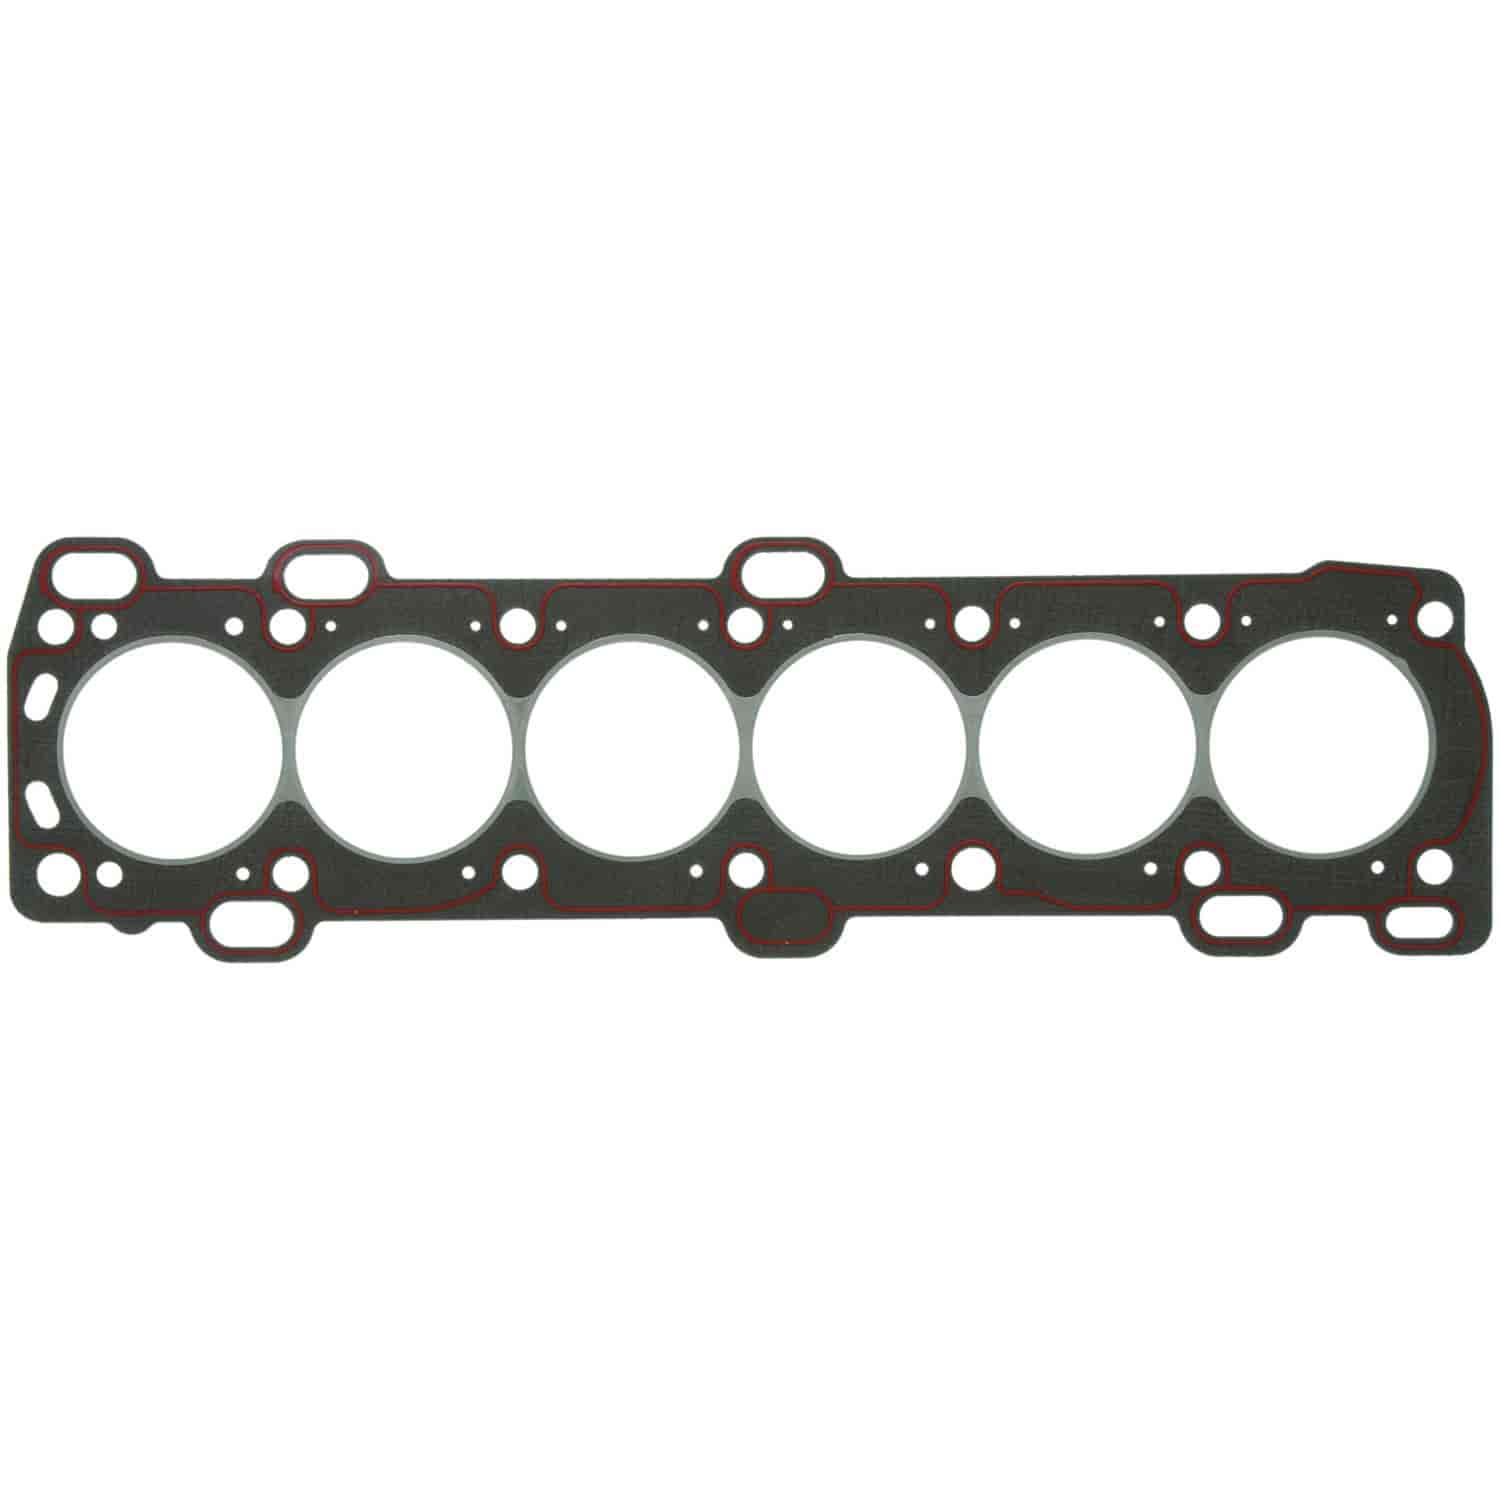 Cylinder Head Gasket Volvo-Pass 2922CC 2.9L VIN 96 and 3.0L VIN 95